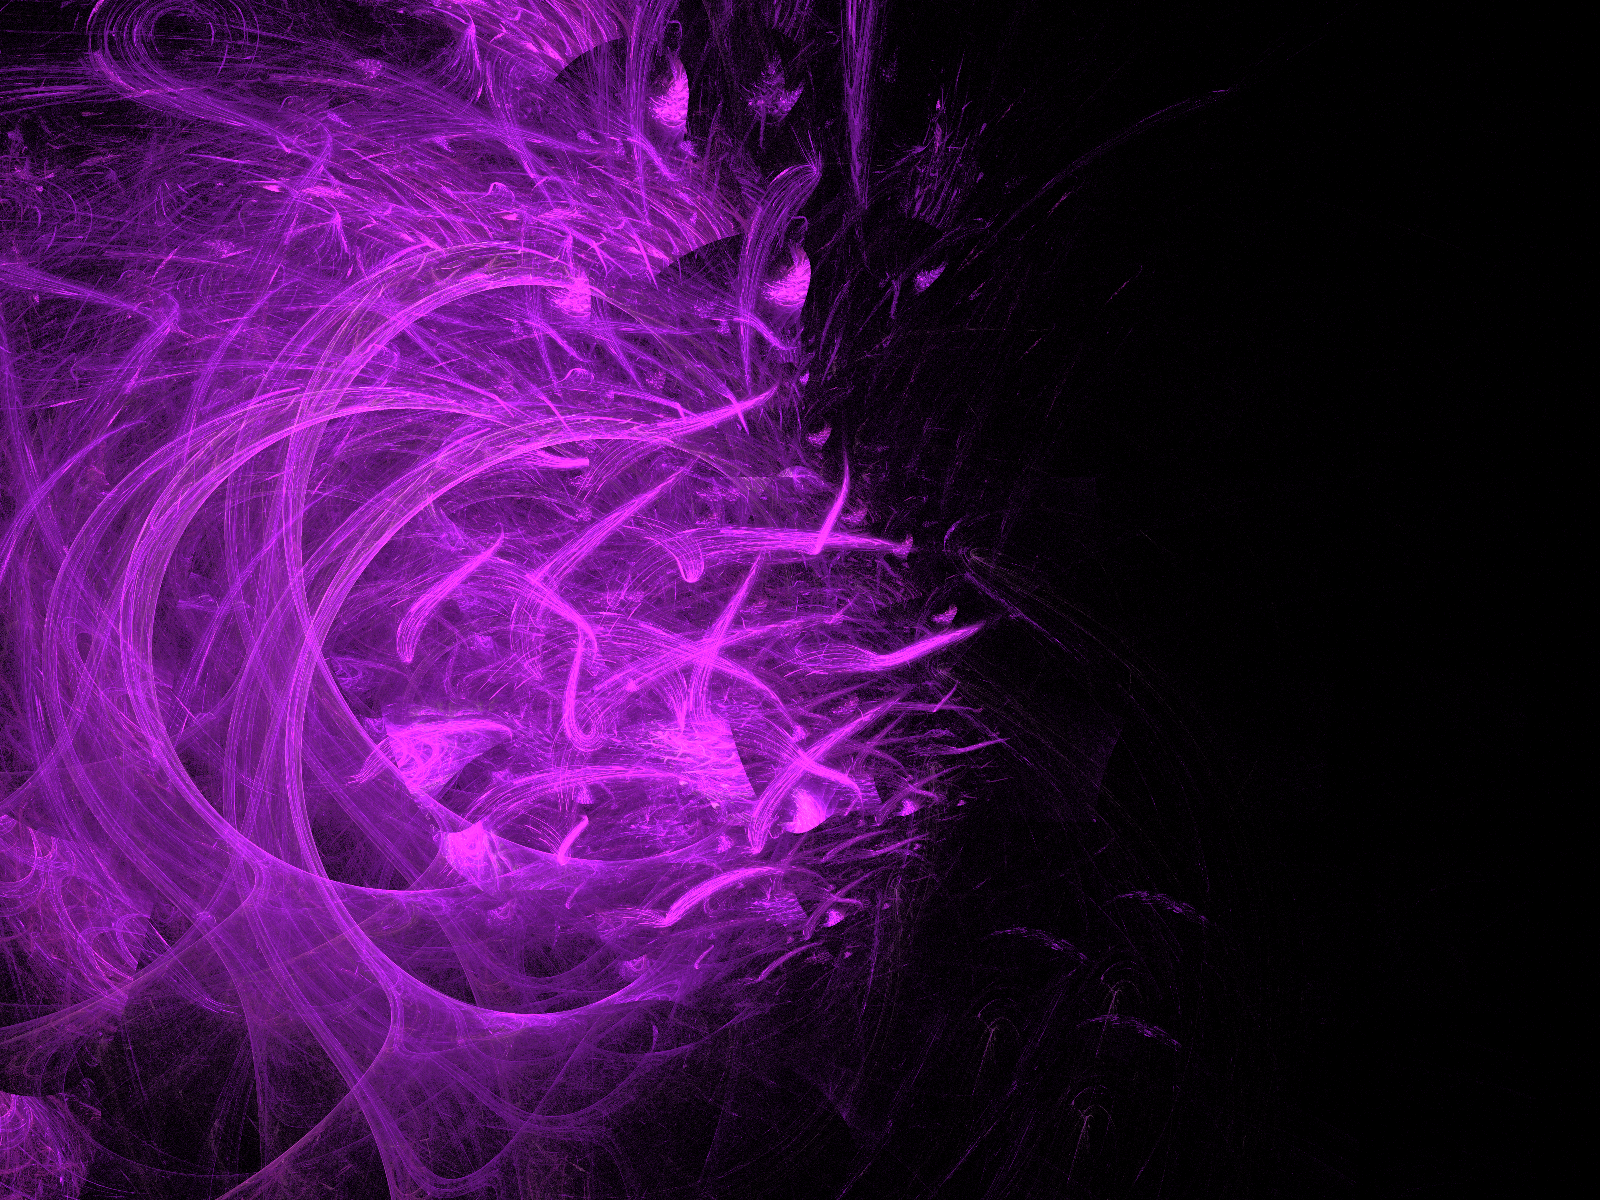 Designs and Cool Black And Purple Backgrounds picturespidercom